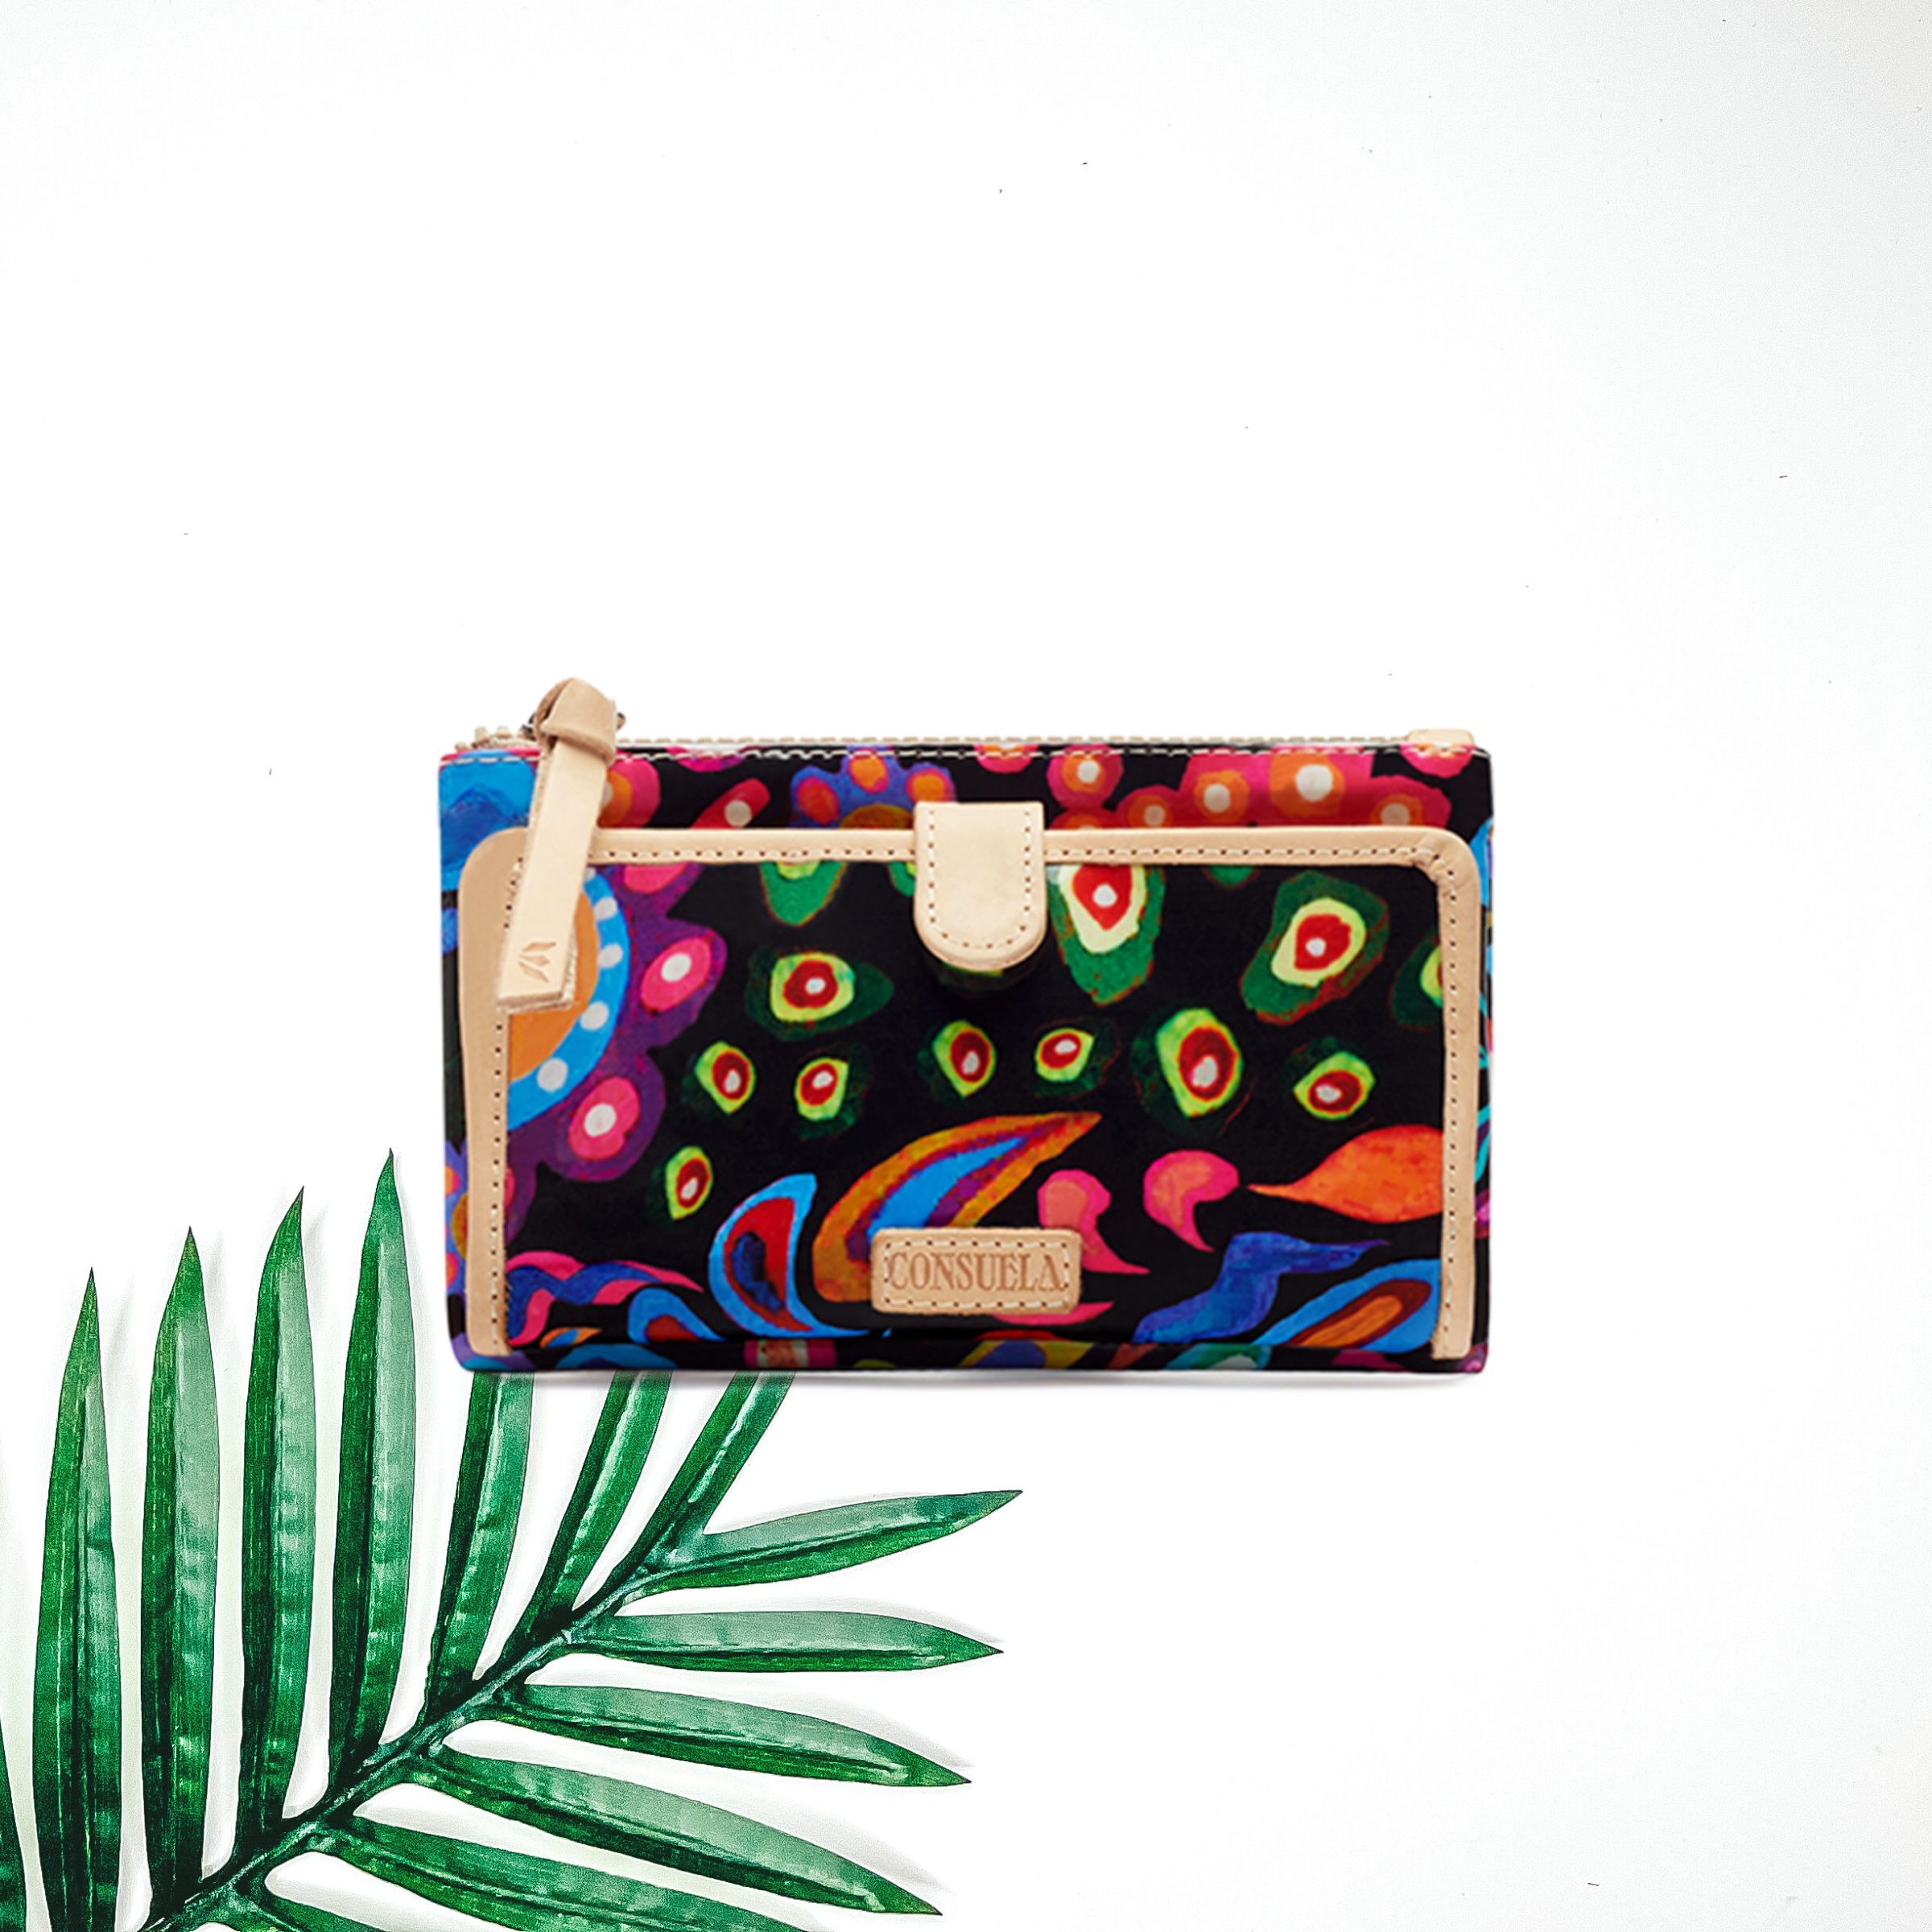 Centered in the picture is a slim wallet with various colored designs. To the left of the wallet is a palm leaf, all on a white background. 